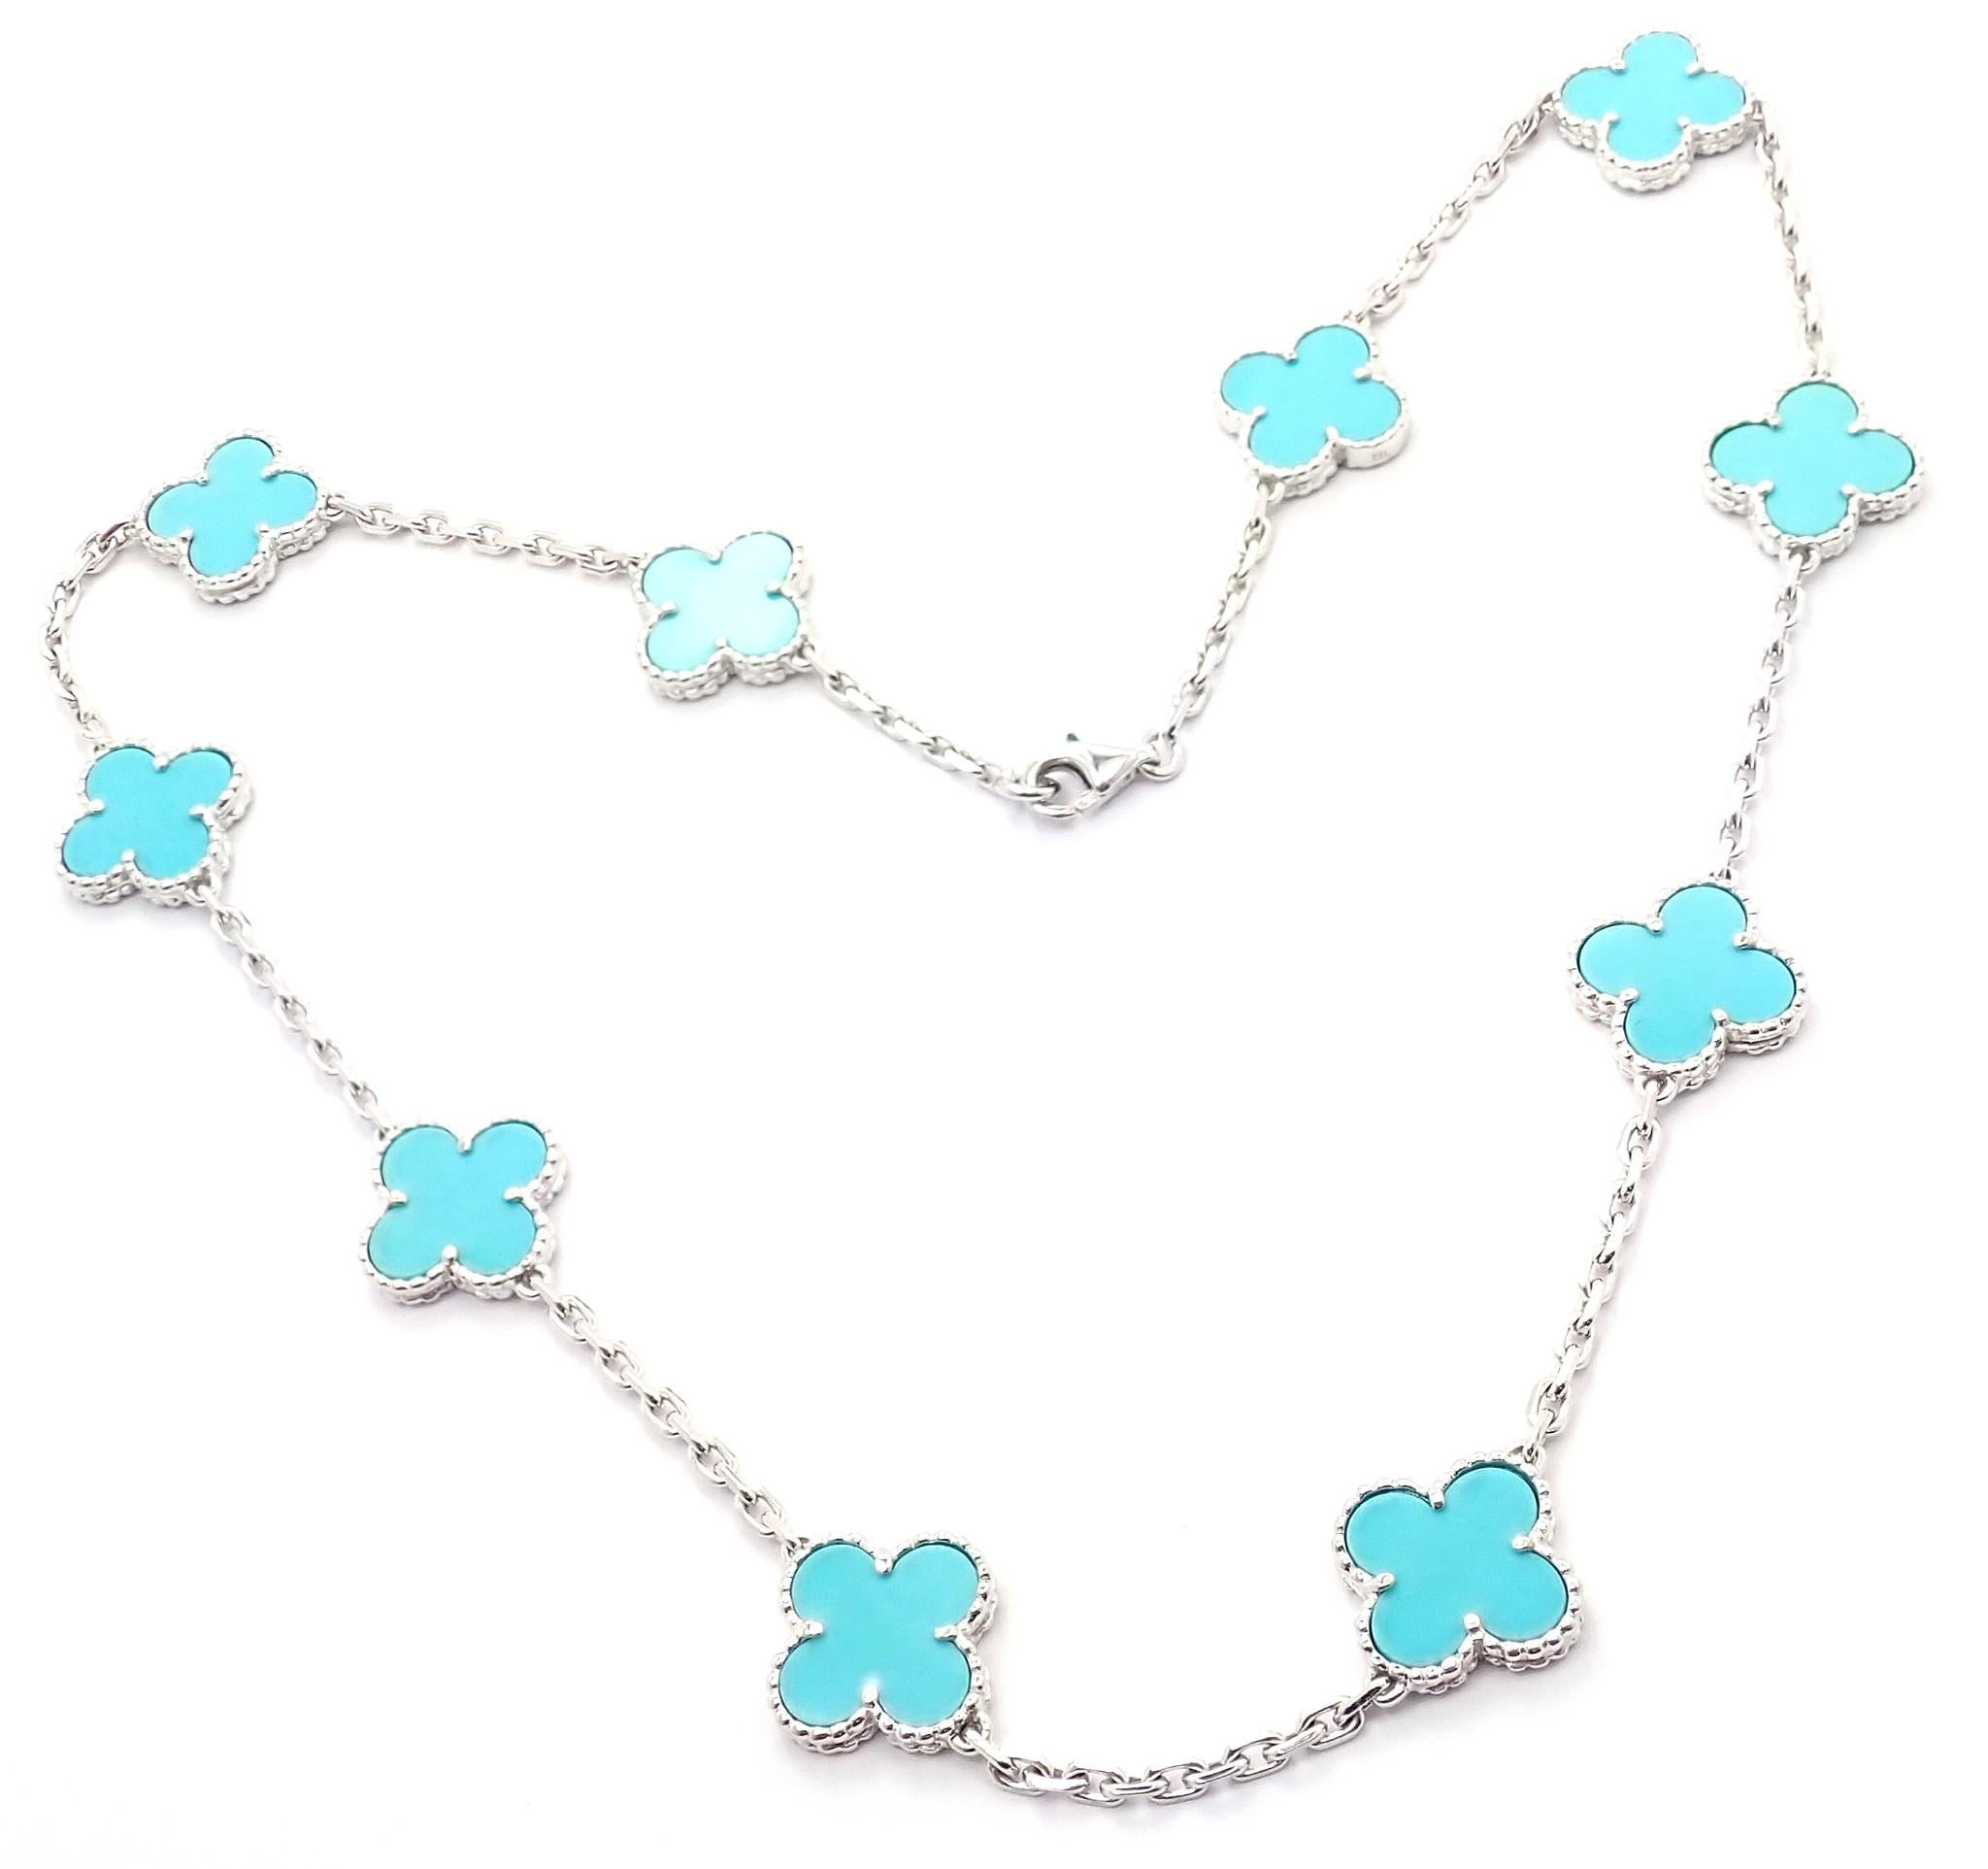 18k White Gold Alhambra 10 Motifs Turquoise Necklace by Van Cleef & Arpels. 
With 10 motifs of turquoise alhambra stones 15mm each.
*** This is an extremely rare, highly collectible turquoise Alhambra necklace by Van Cleef & Arpels***
This necklace